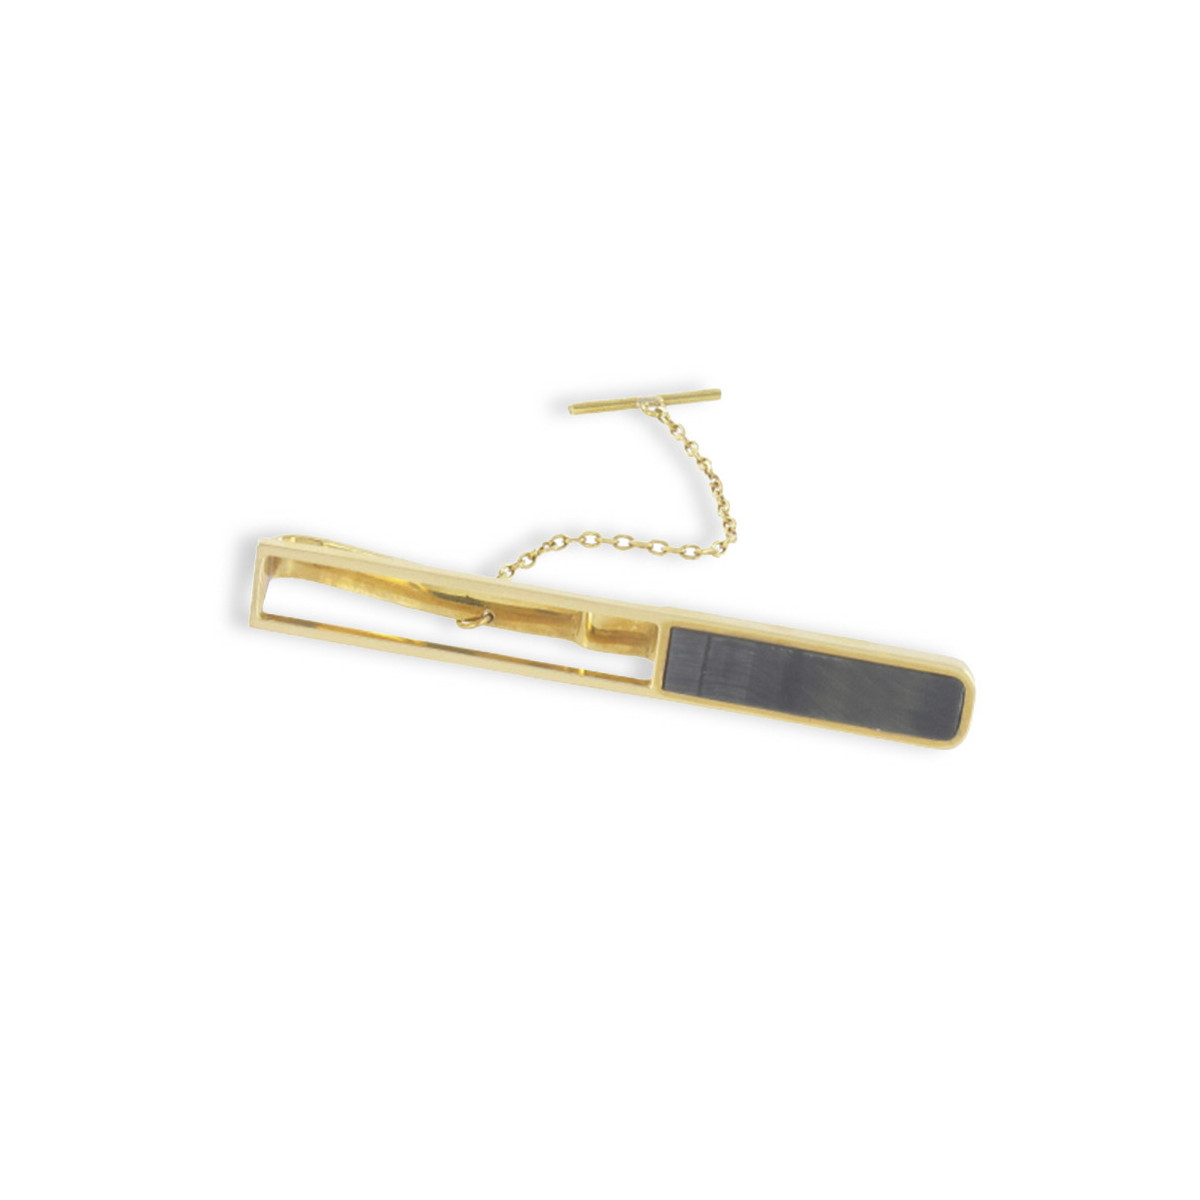 GOLD AND ONYX TIE PIN